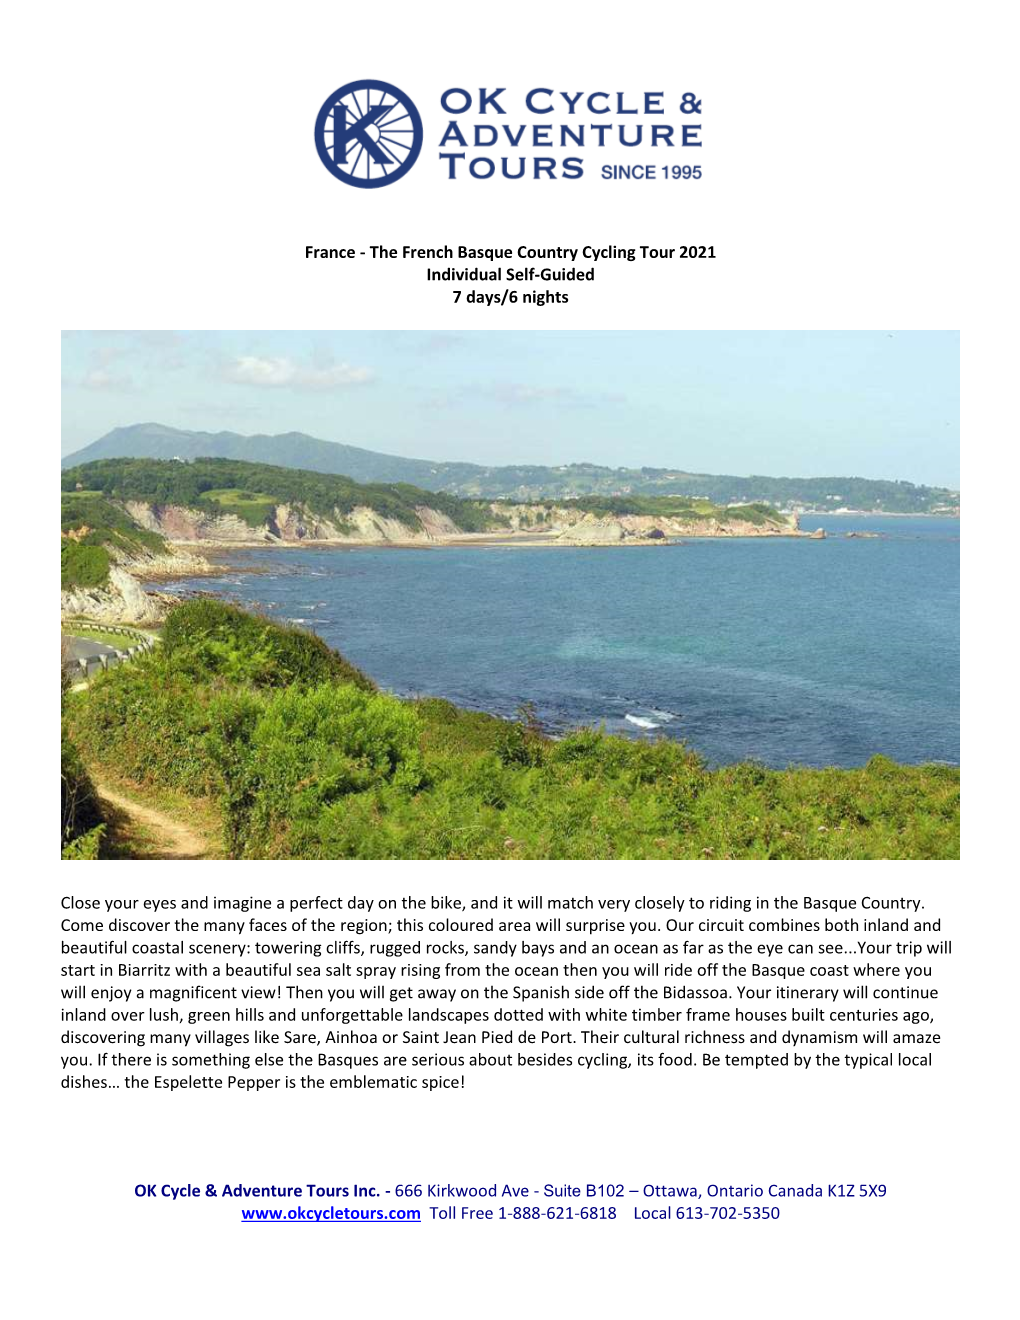 France - the French Basque Country Cycling Tour 2021 Individual Self-Guided 7 Days/6 Nights